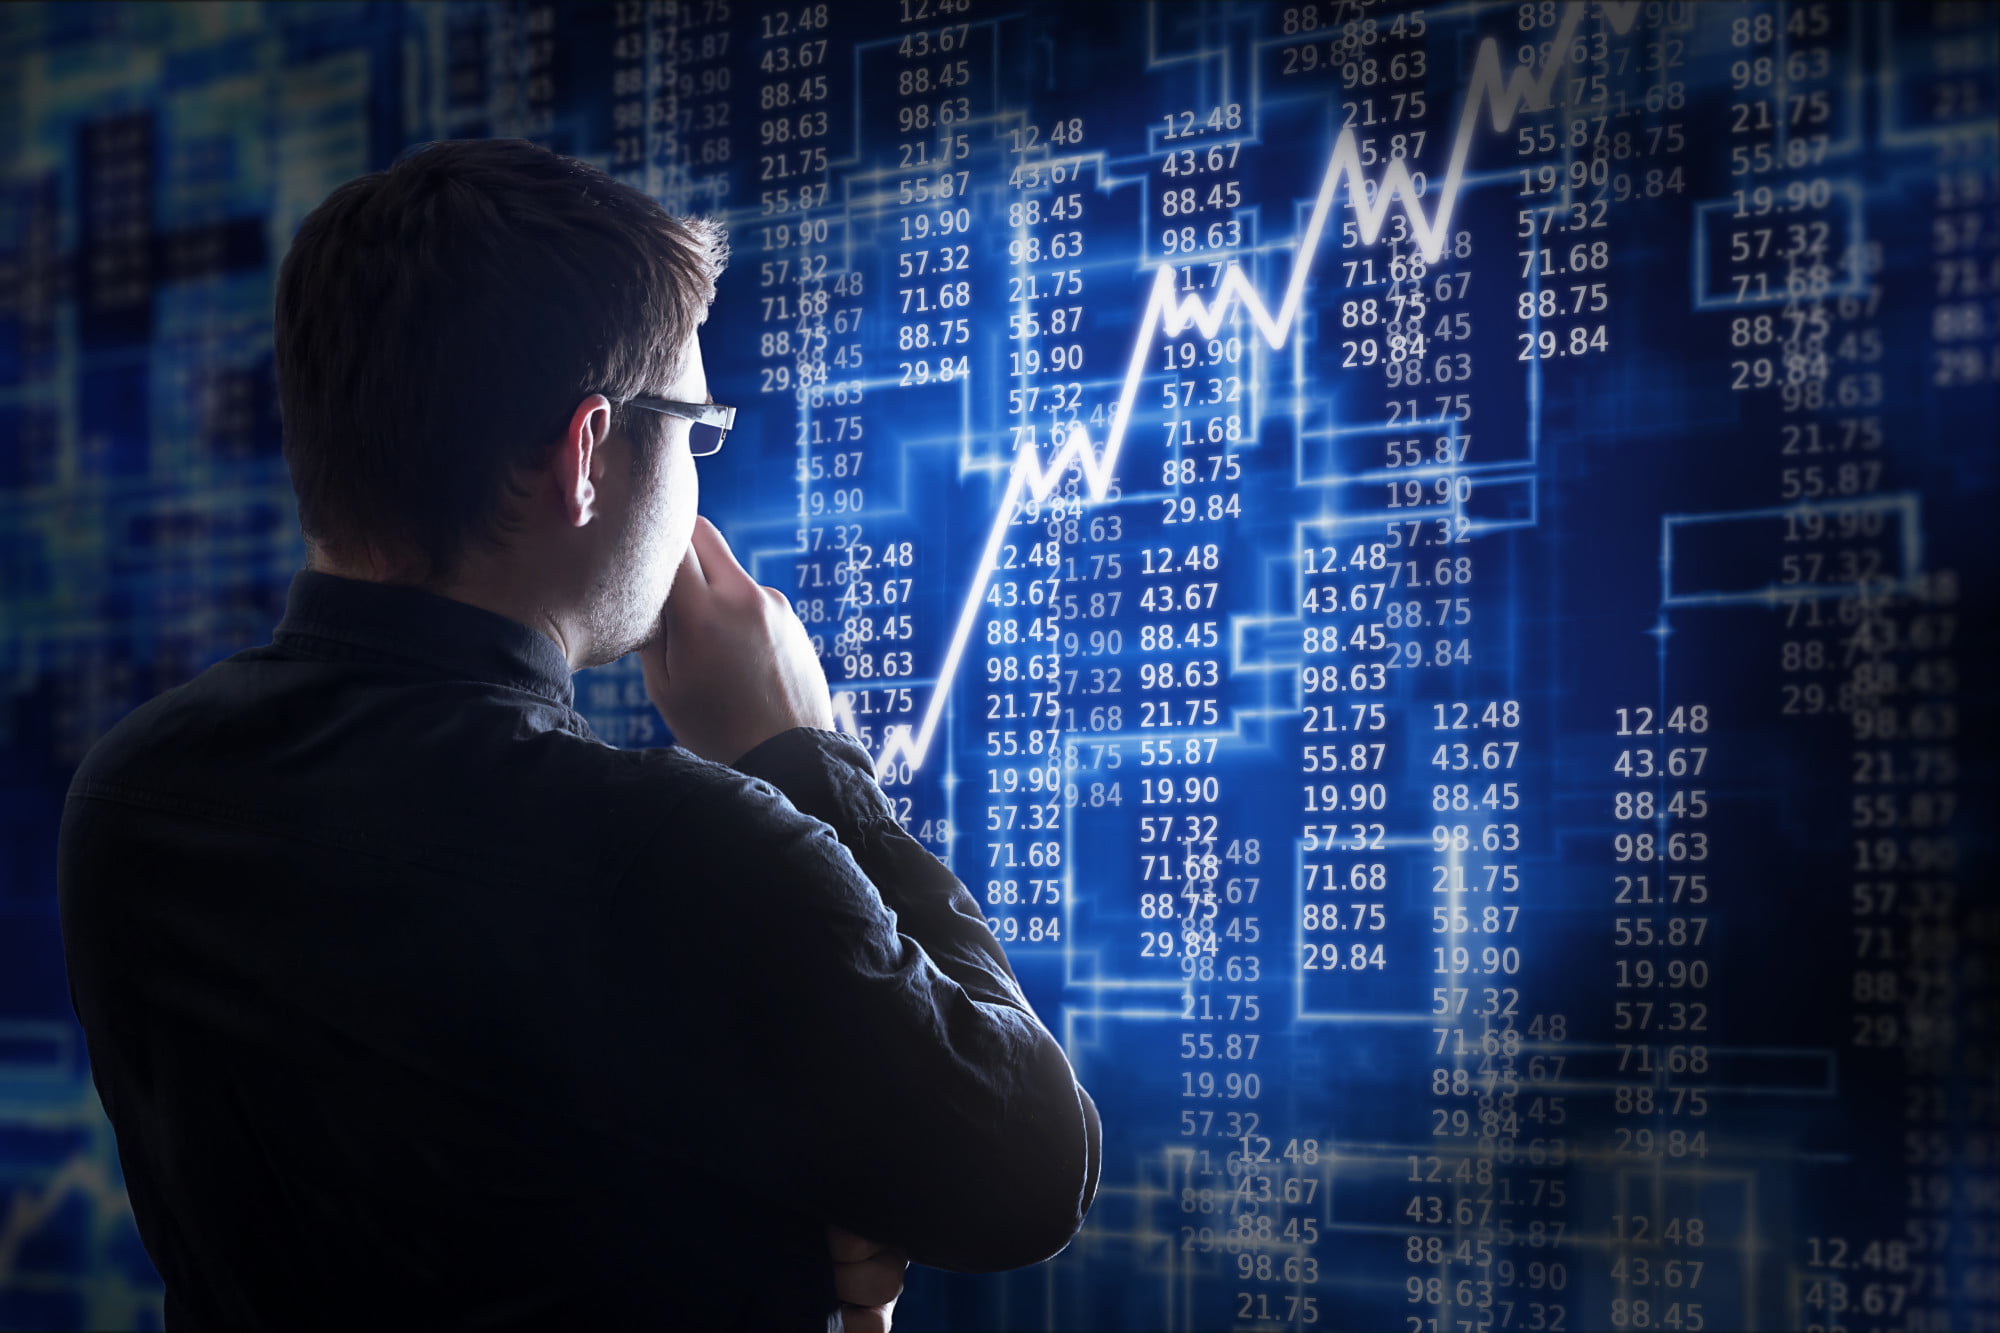 Experts can predict movements in the stock market with great accuracy. Wondering what factors drive stock market predictions? Find out here.